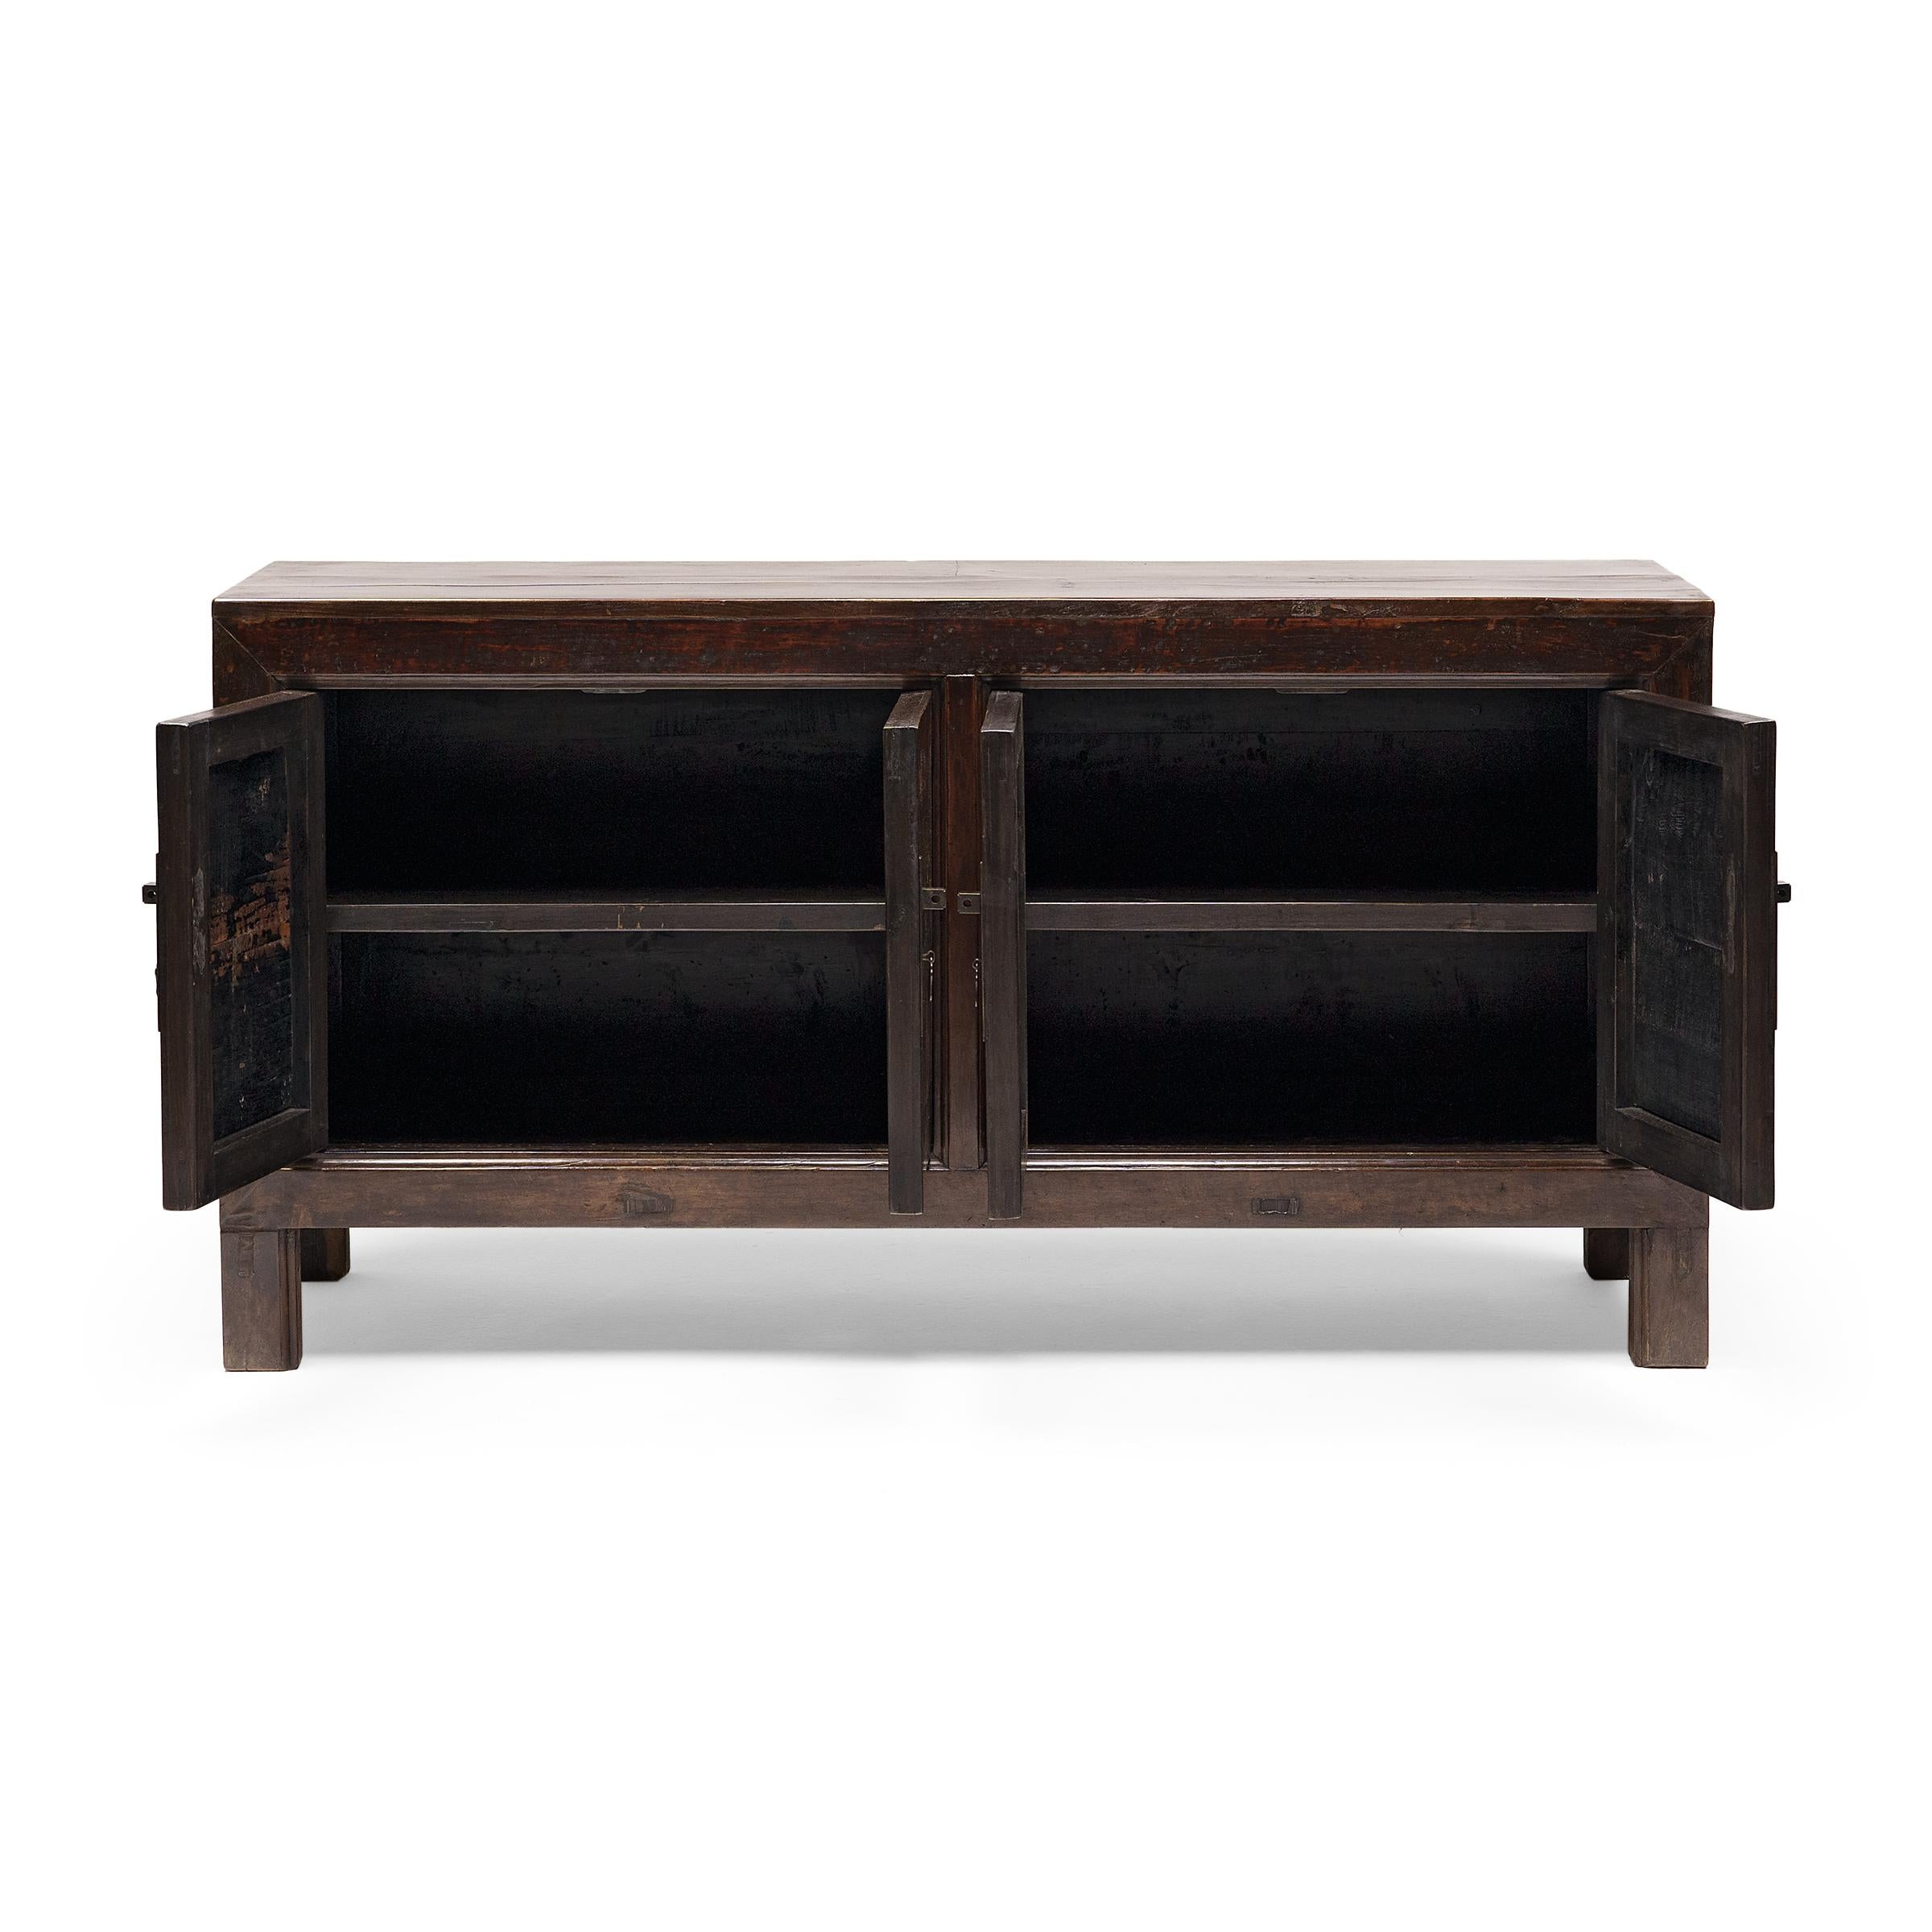 This 19th-century Mongolian storage coffer balances a streamlined silhouette with textured, wabi-sabi materials. Also referred to as a herdsman's chest, the four-door sideboard is expertly crafted of walnut using mortise-and-tenon joinery, without